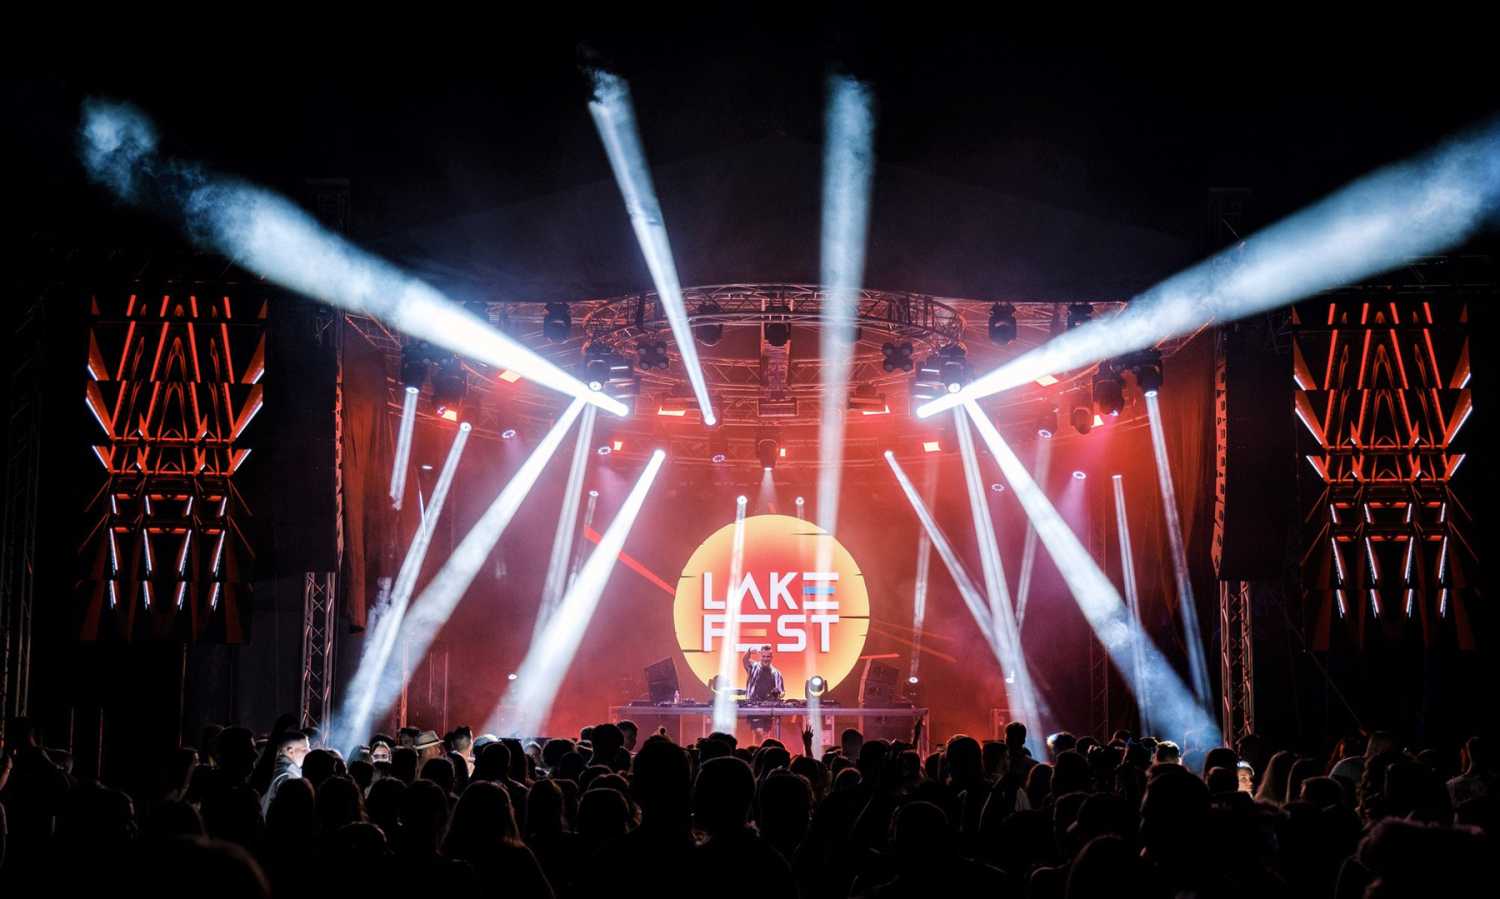 The Chameleon Rental team anchored their rig with 88 Chauvet Professional fixtures